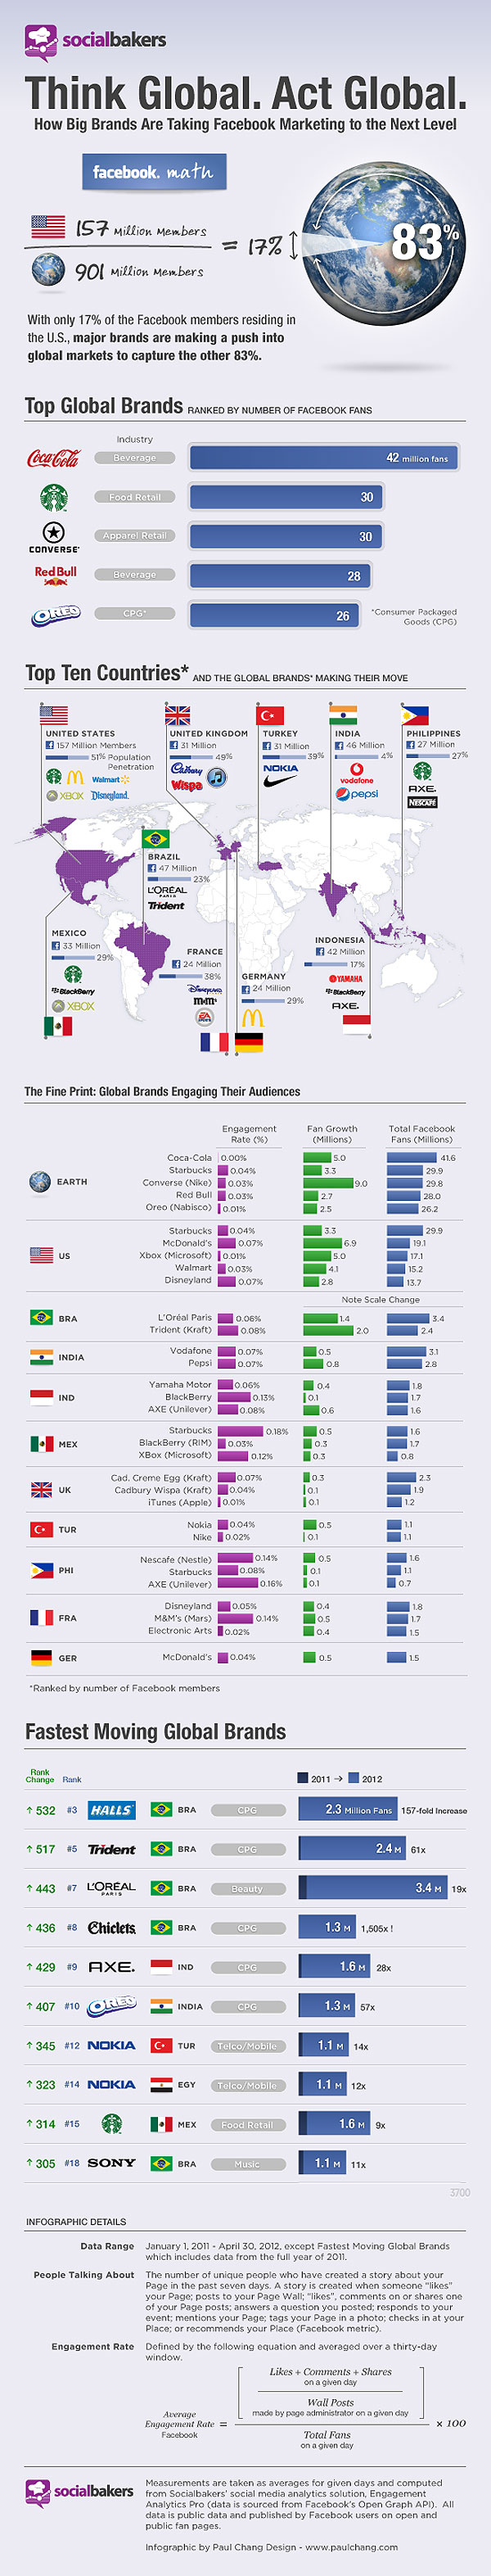 How Facebook Helps Brands Think & Act Globally [Infographic]